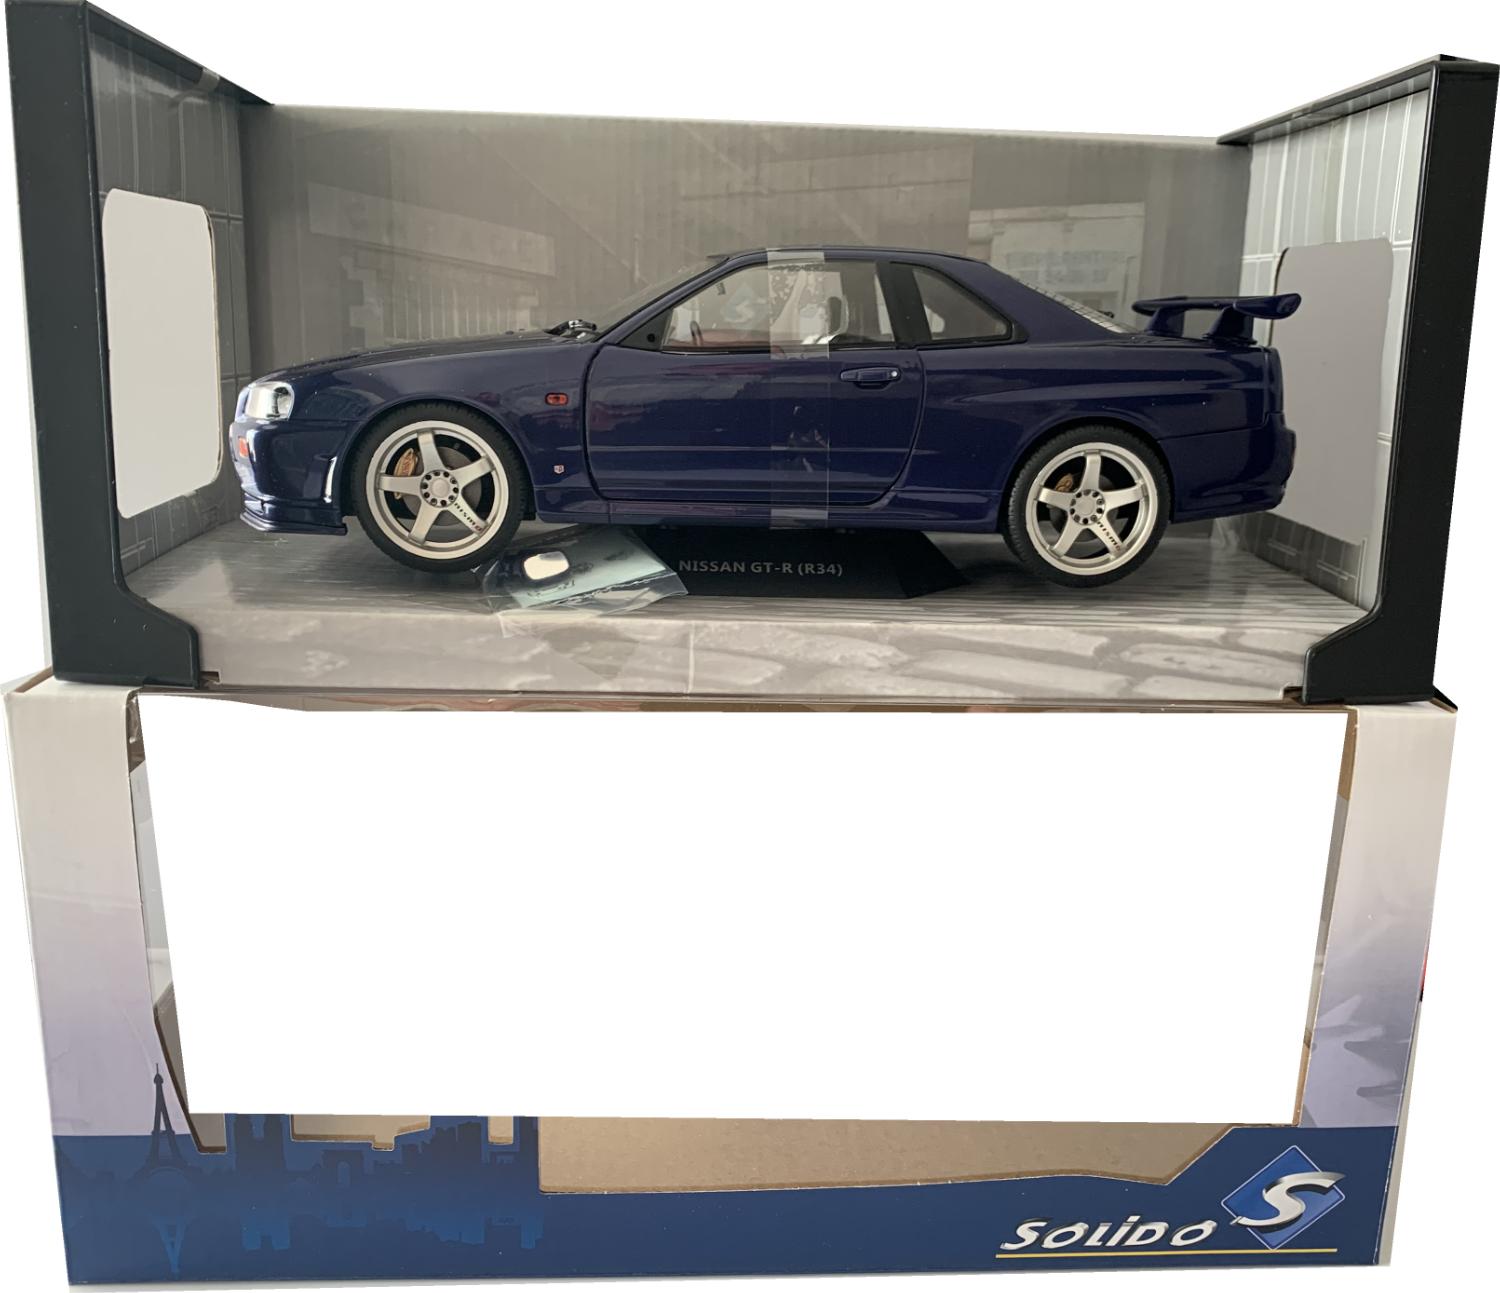 An excellent scale model of the Nissan Skyline GT-R (34) with high level of detail throughout, all authentically recreated.  Model is presented in a window display box.  Please note wing mirrors are provided and need to be fitted  The car is approx. 25 cm long and the presentation box is 31 cm long